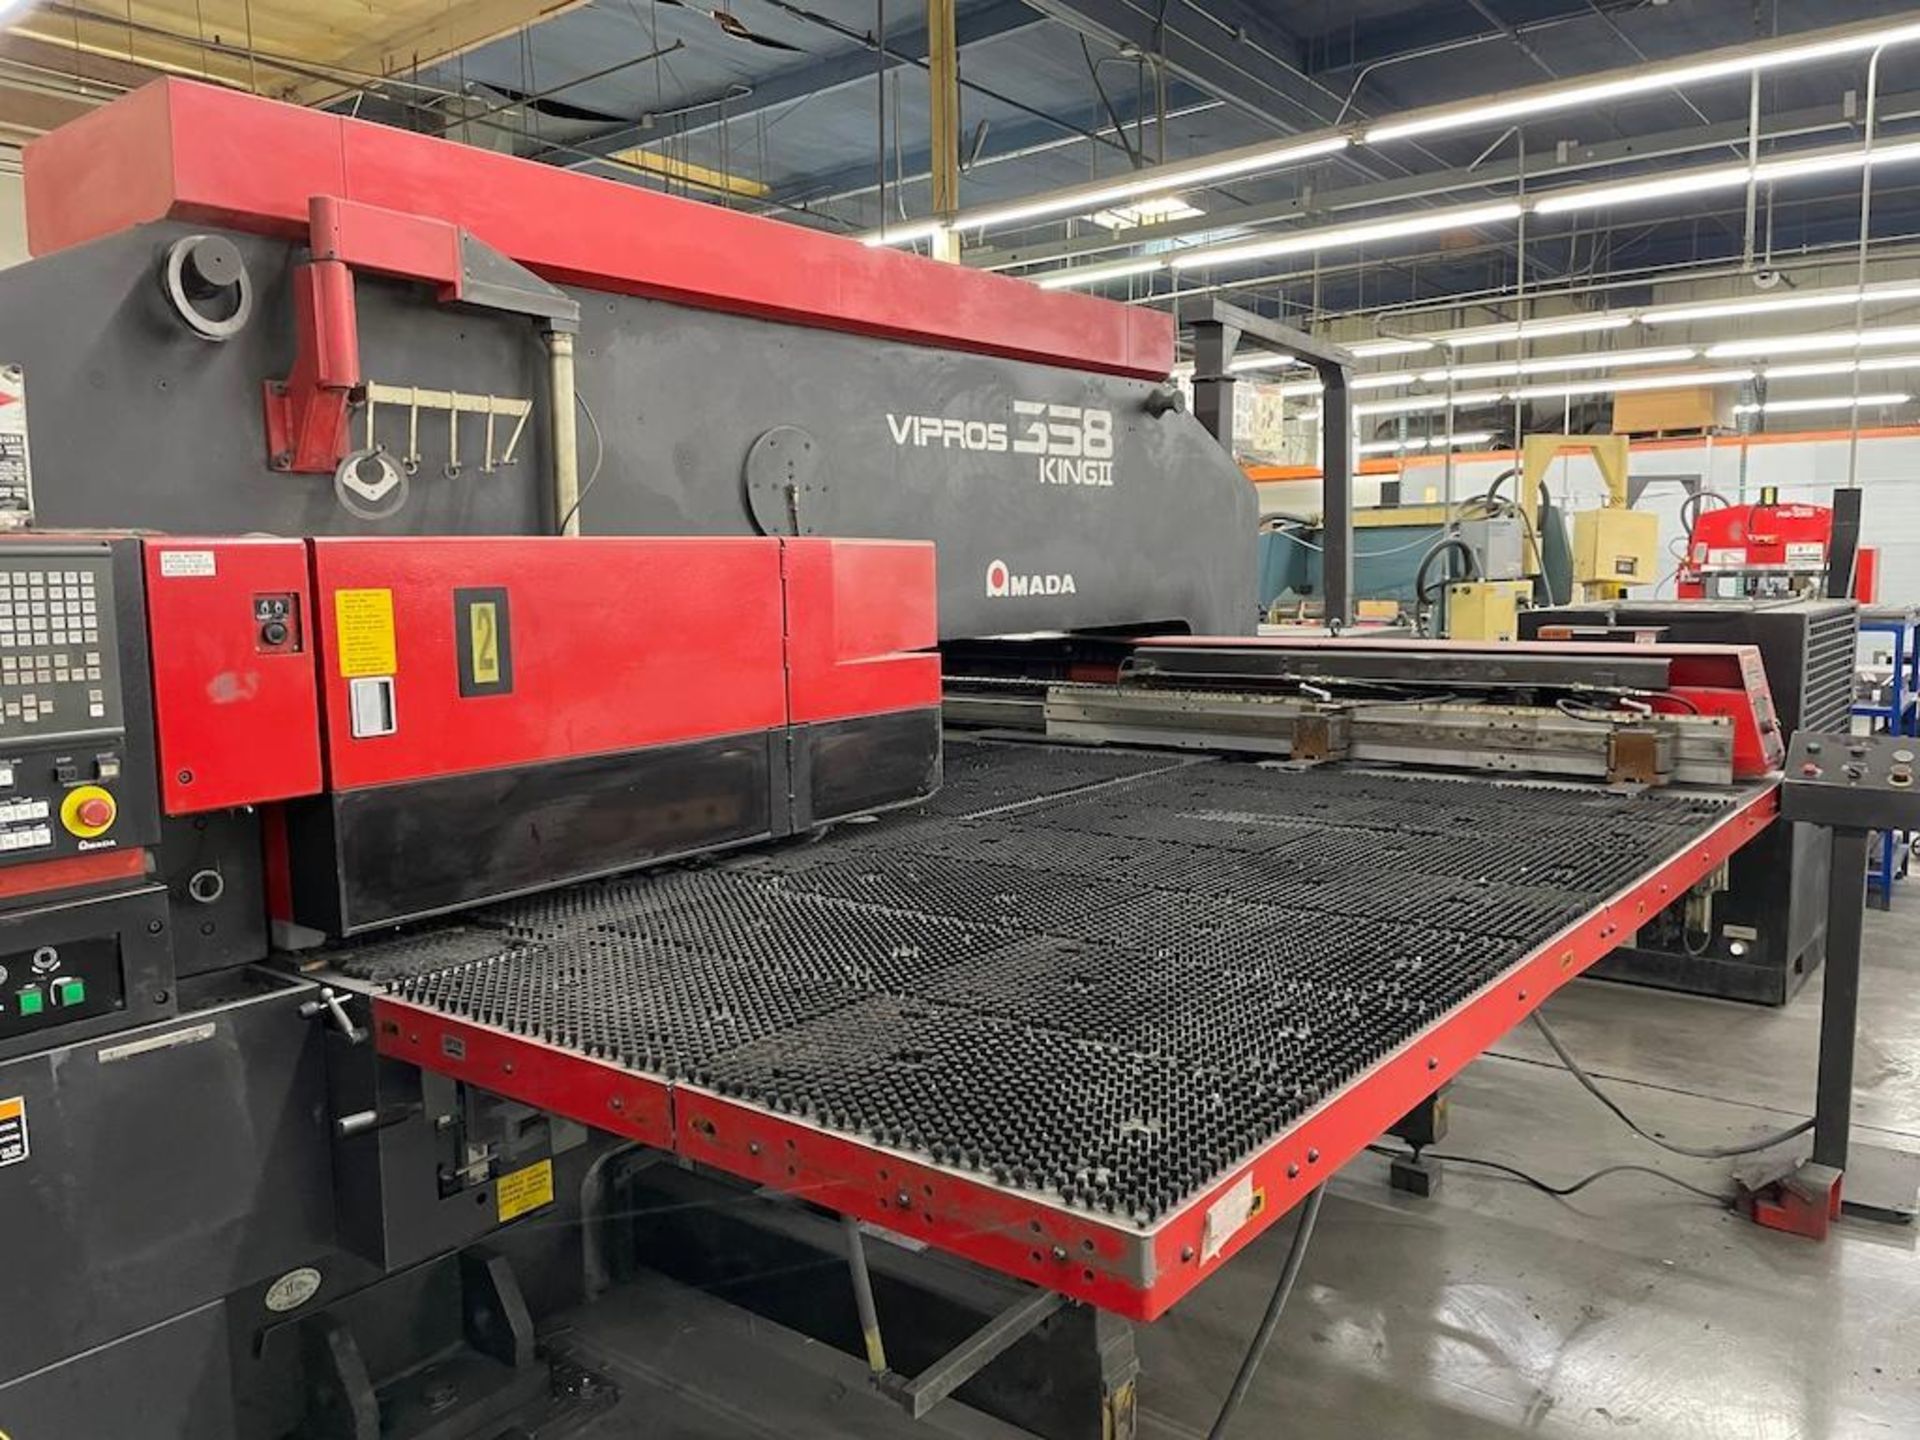 AMADA VIPROSS 358 KING II, 30 TON TURRET PUNCH, 58 STATION TURRET W 4 AUTO INDEX, TABLE TRAVEL 50 IN - Image 3 of 11